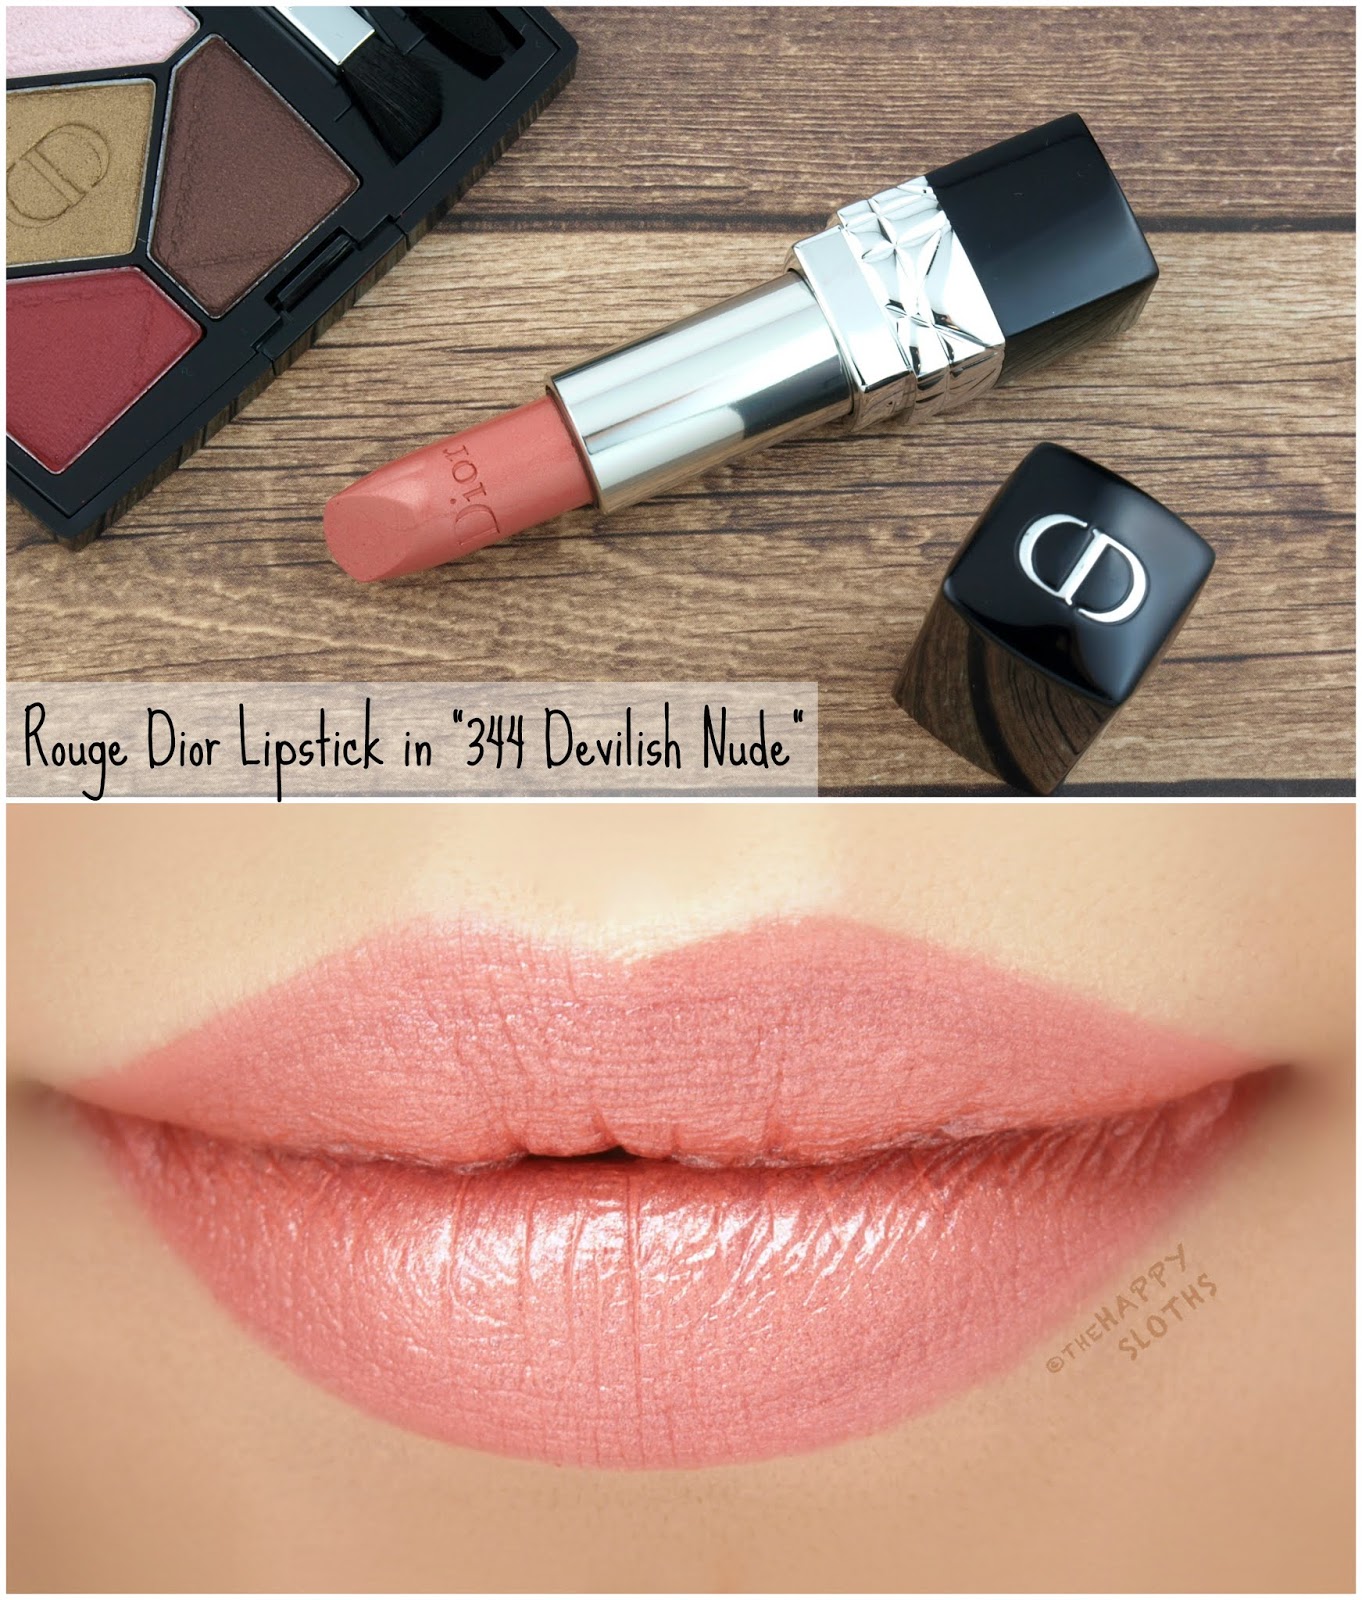 Dior Fall 2018 Dior en Diable Collection | Rouge Dior Couture Colour Lipstick in "344 Devilish Nude": Review and Swatches